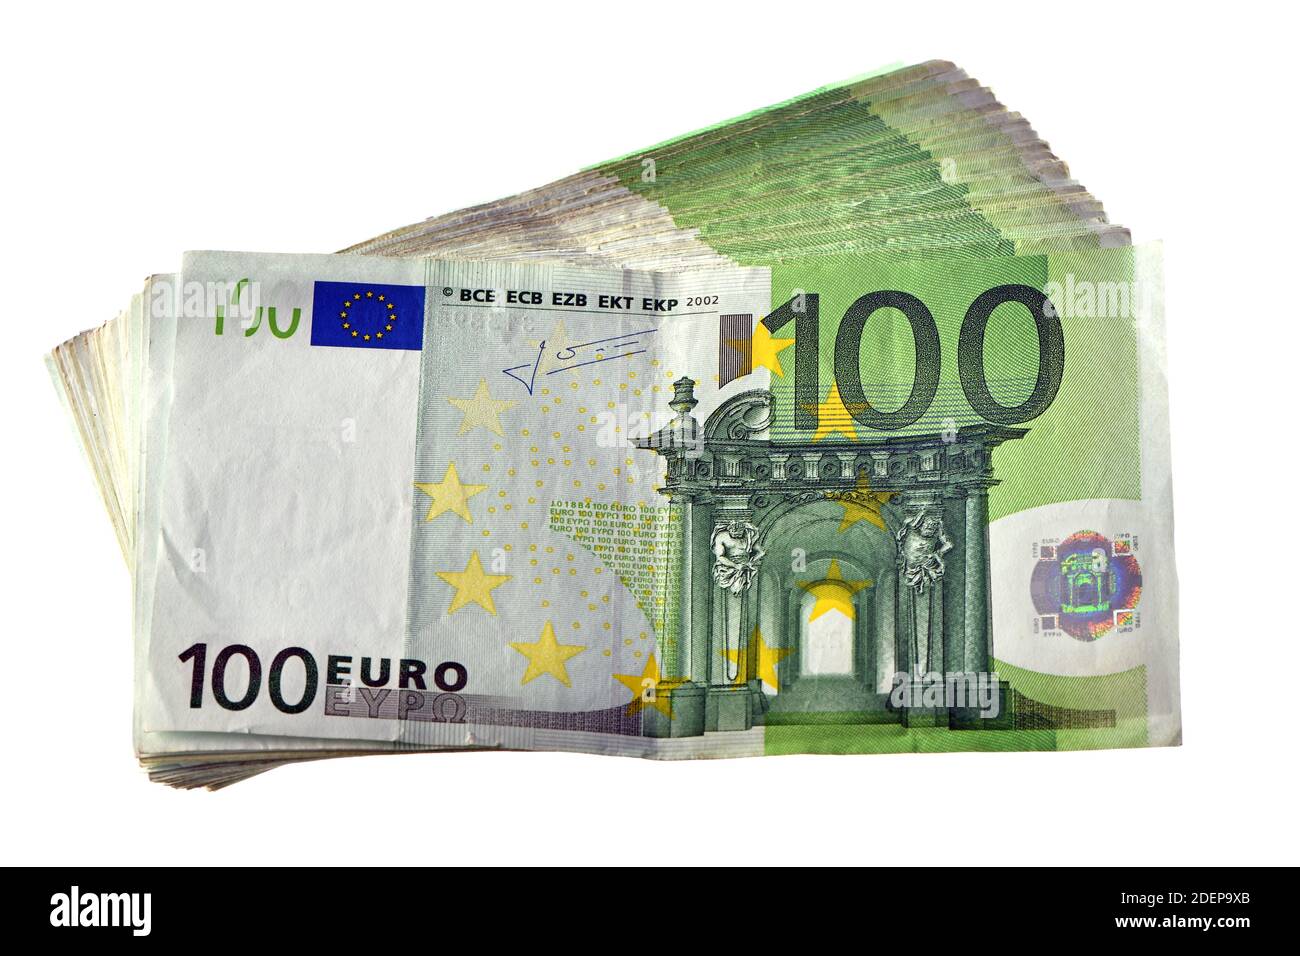 a pile of 10,000 euros -1000 € - in one hundred 100 euro banknotes isolated on white background Stock Photo